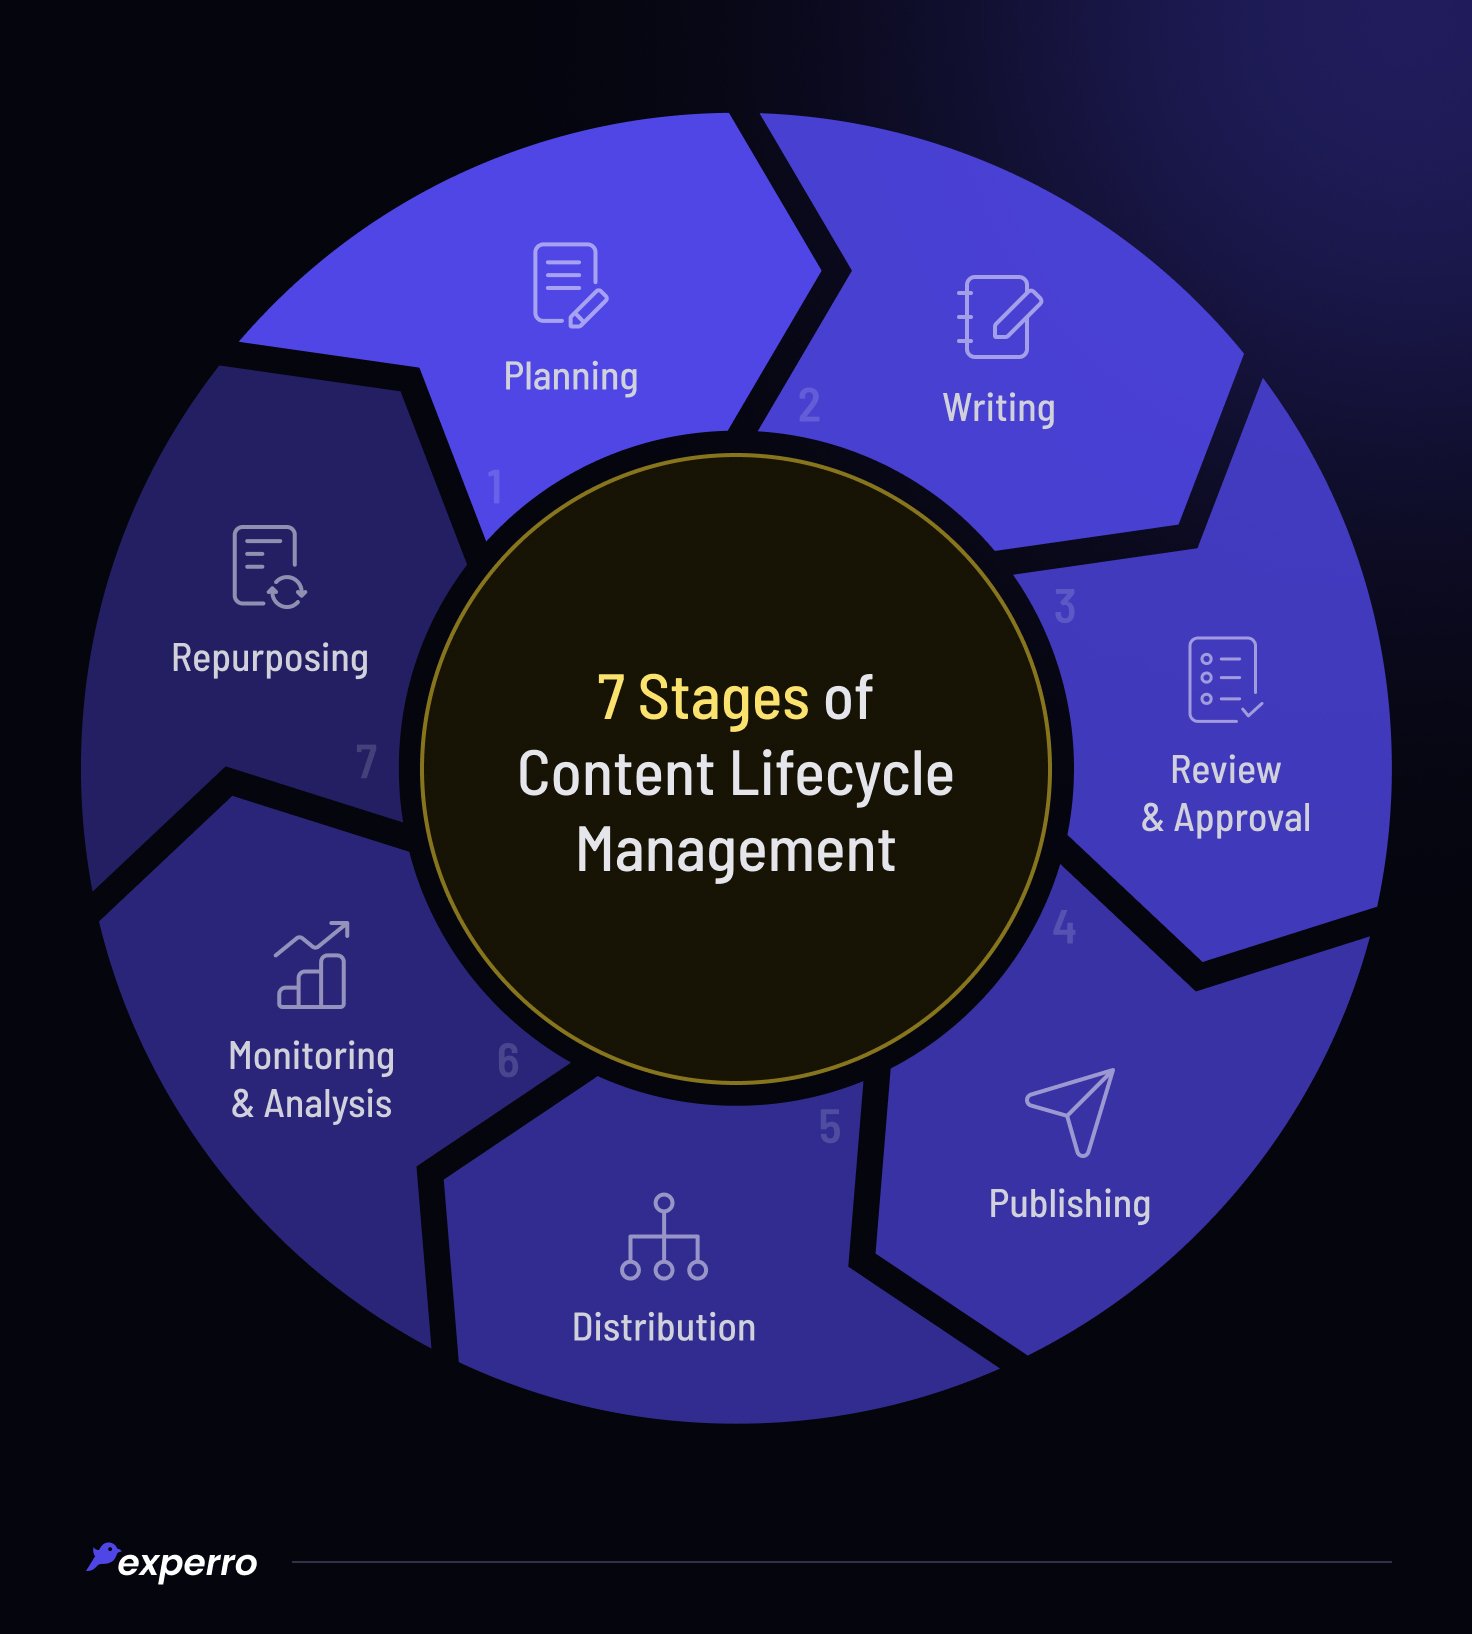 7 Stages of Content Lifecycle Management